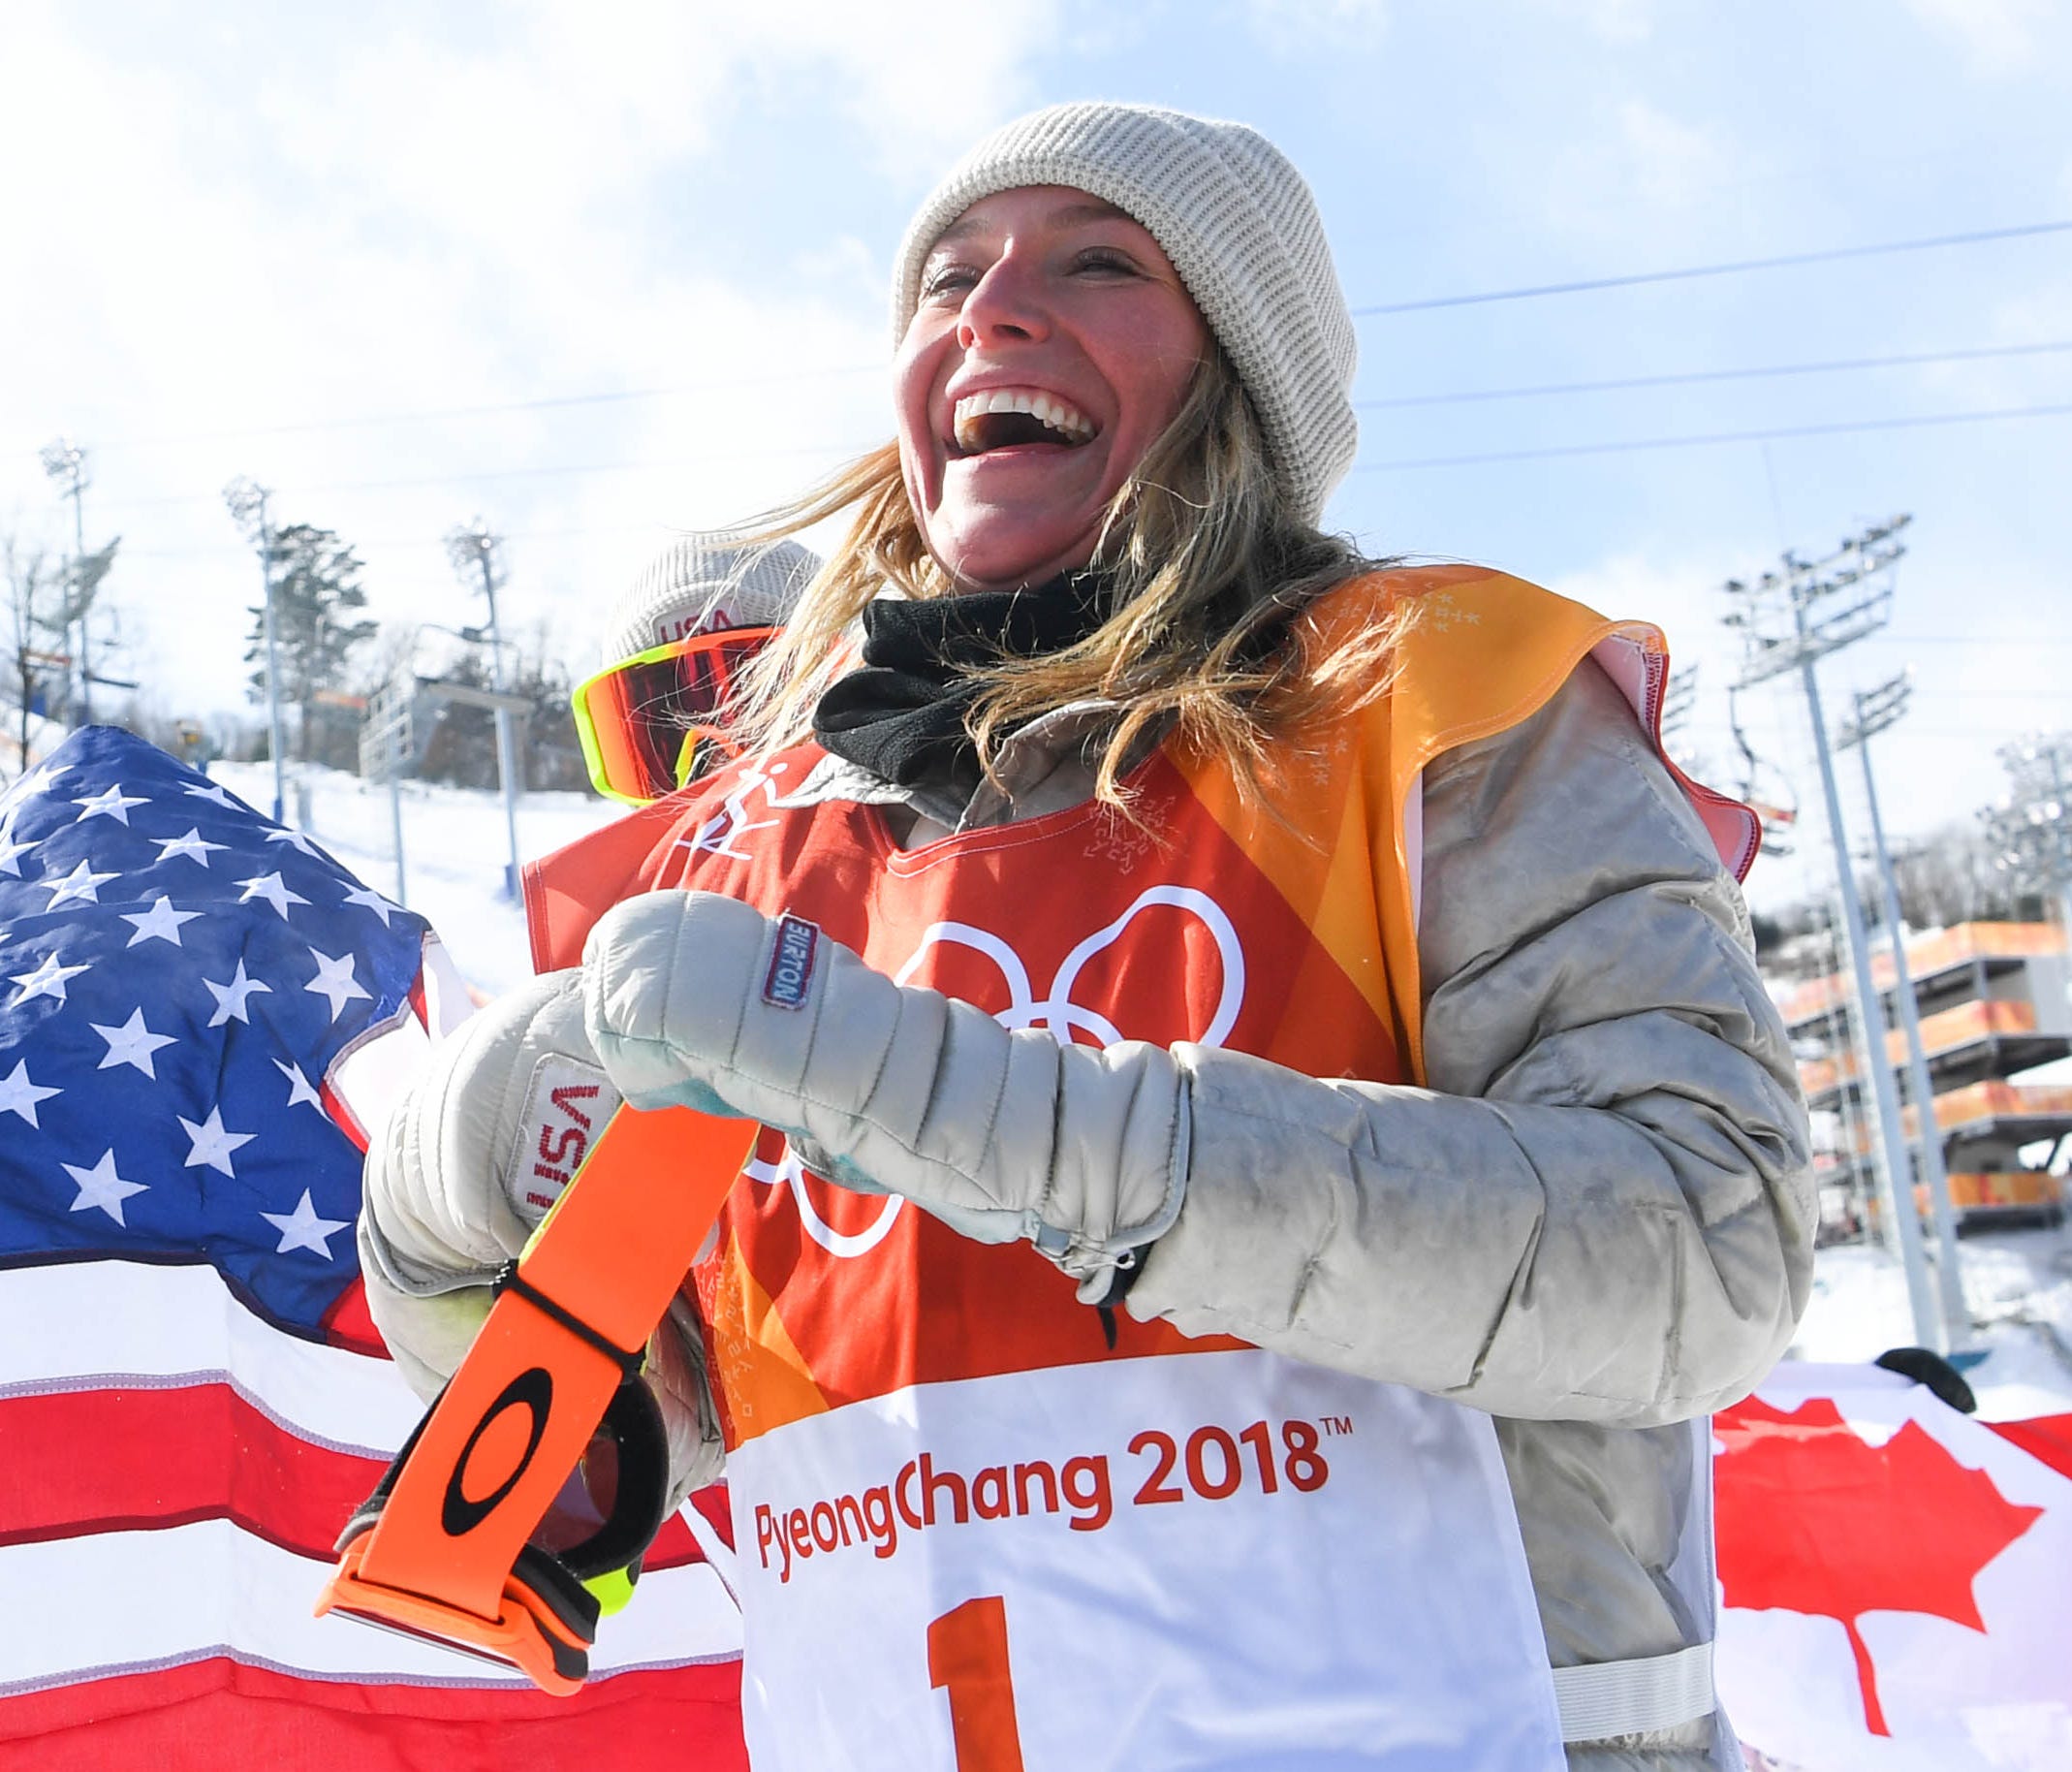 Jamie Anderson will compete in the women's big air snowboarding.